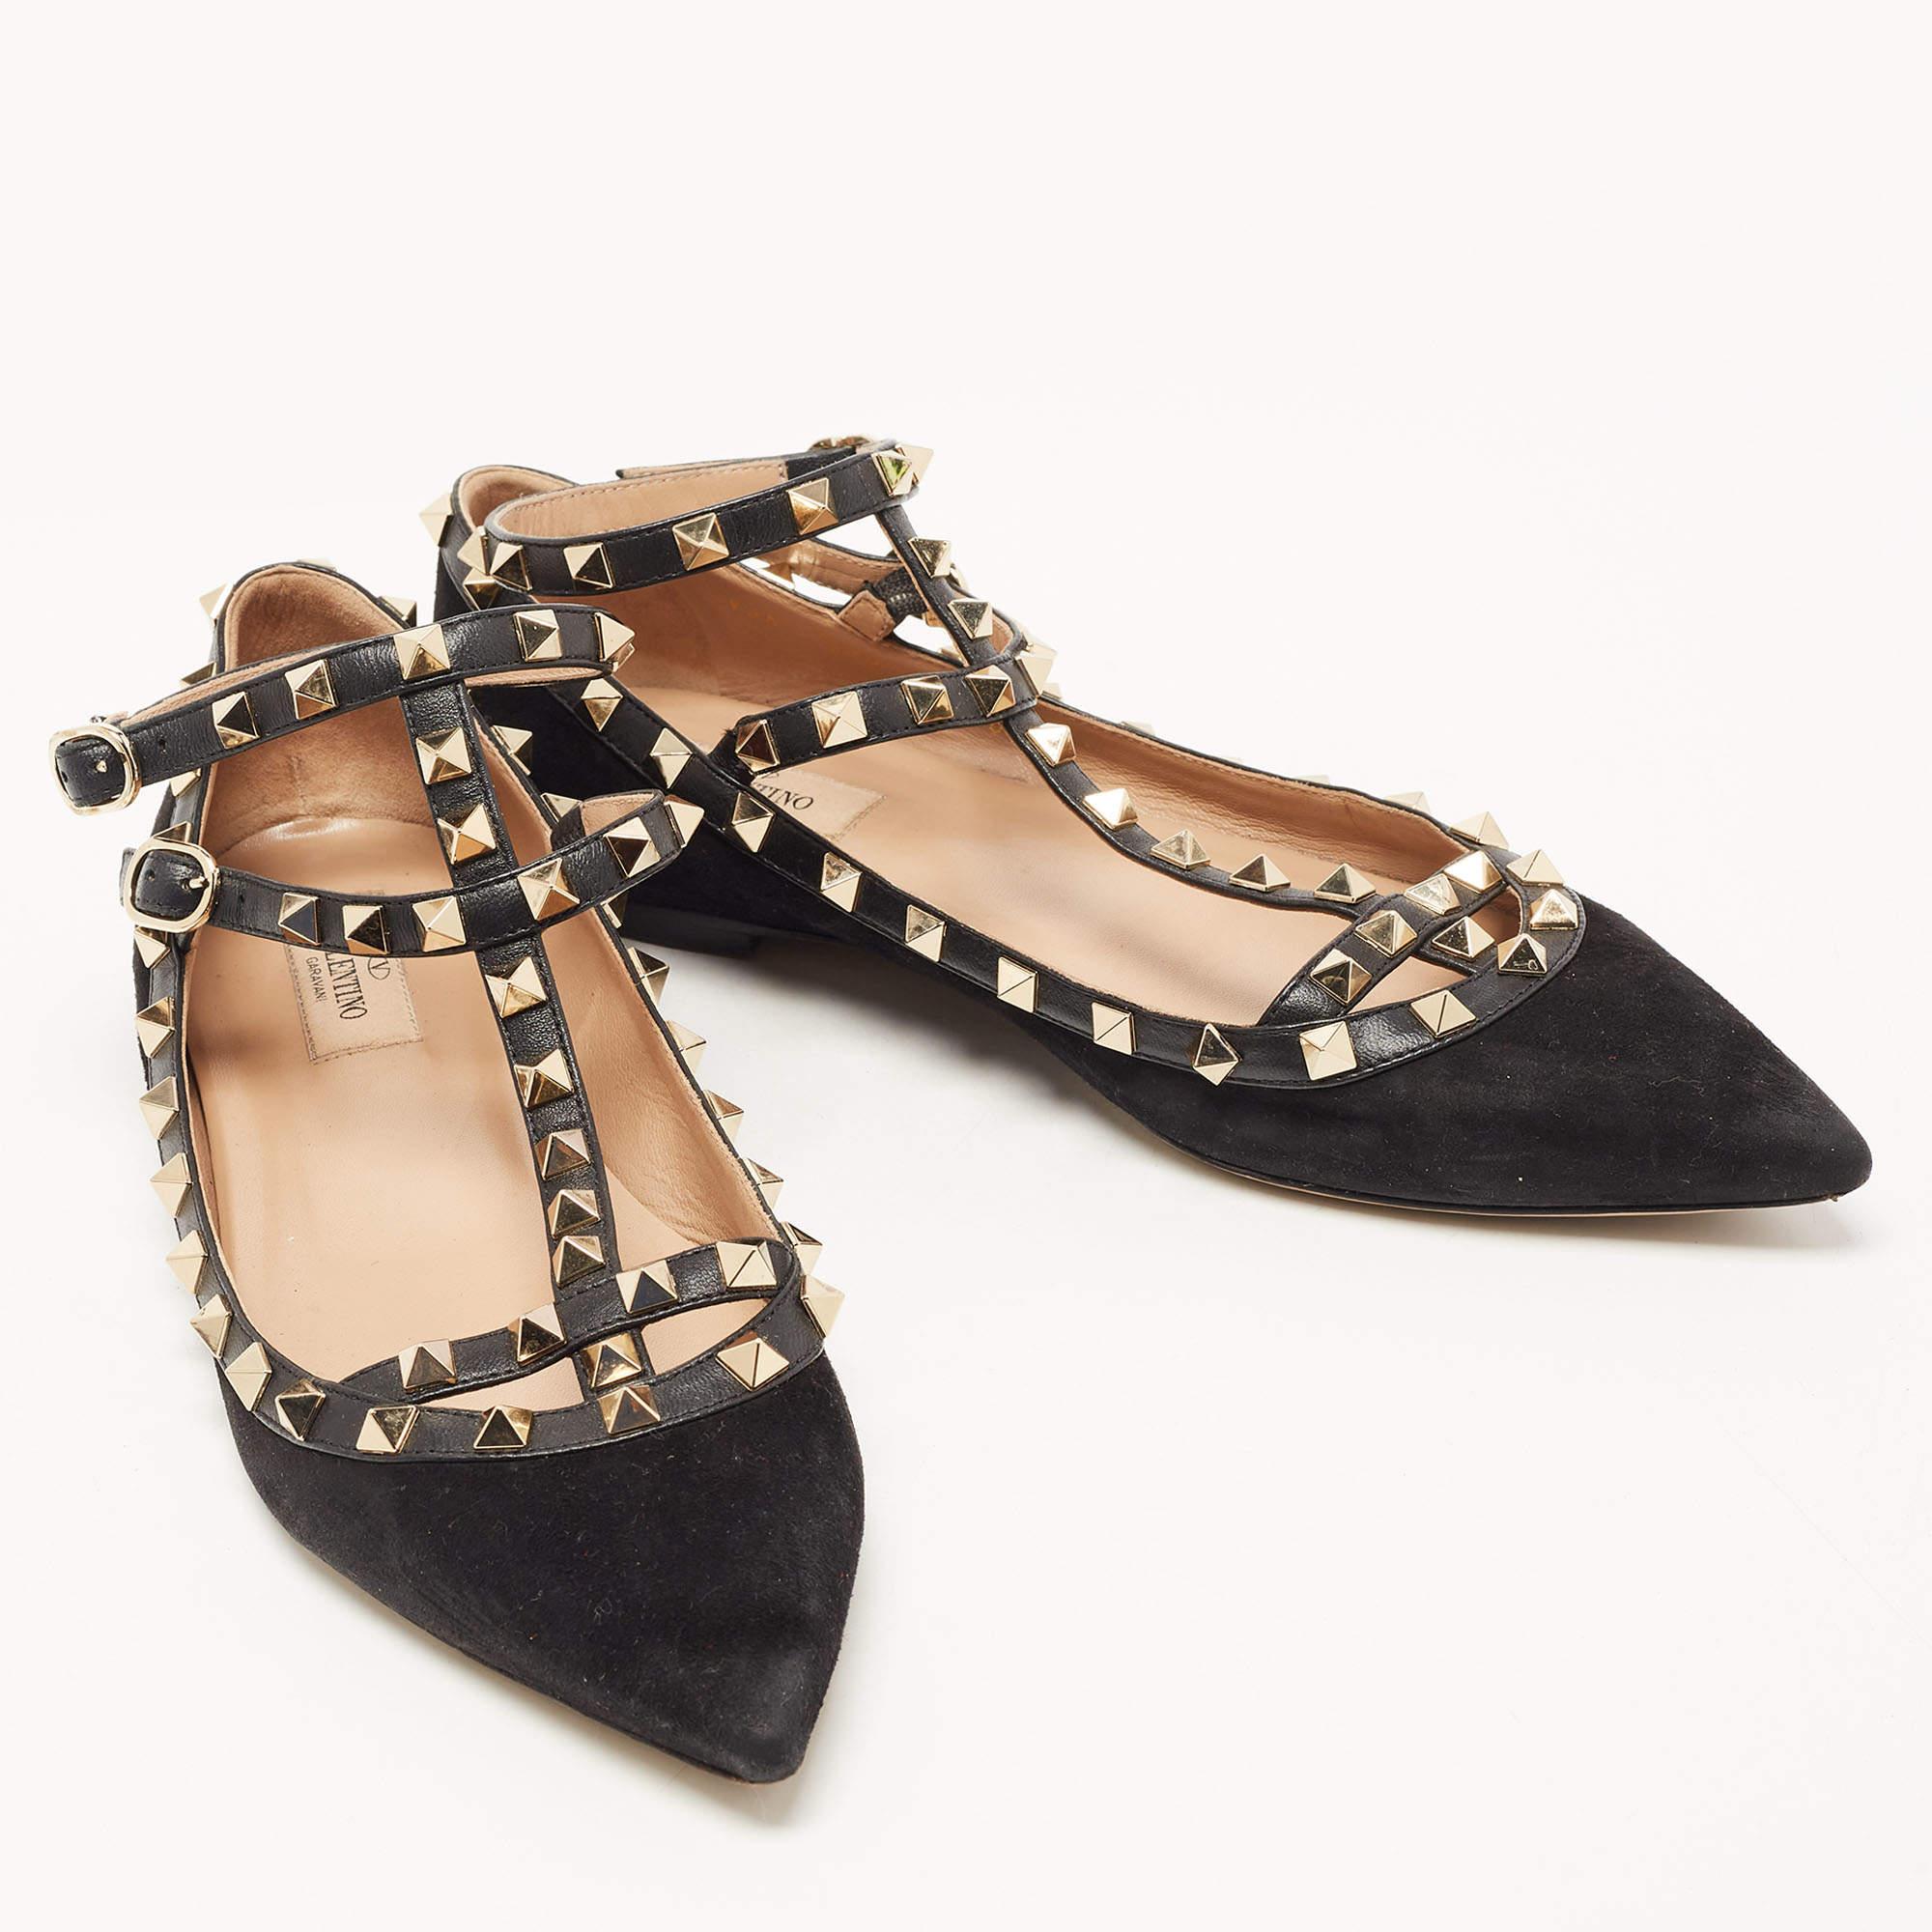 Valentino Black Suede and Leather Rockstud Ballet Flats Size 40 4